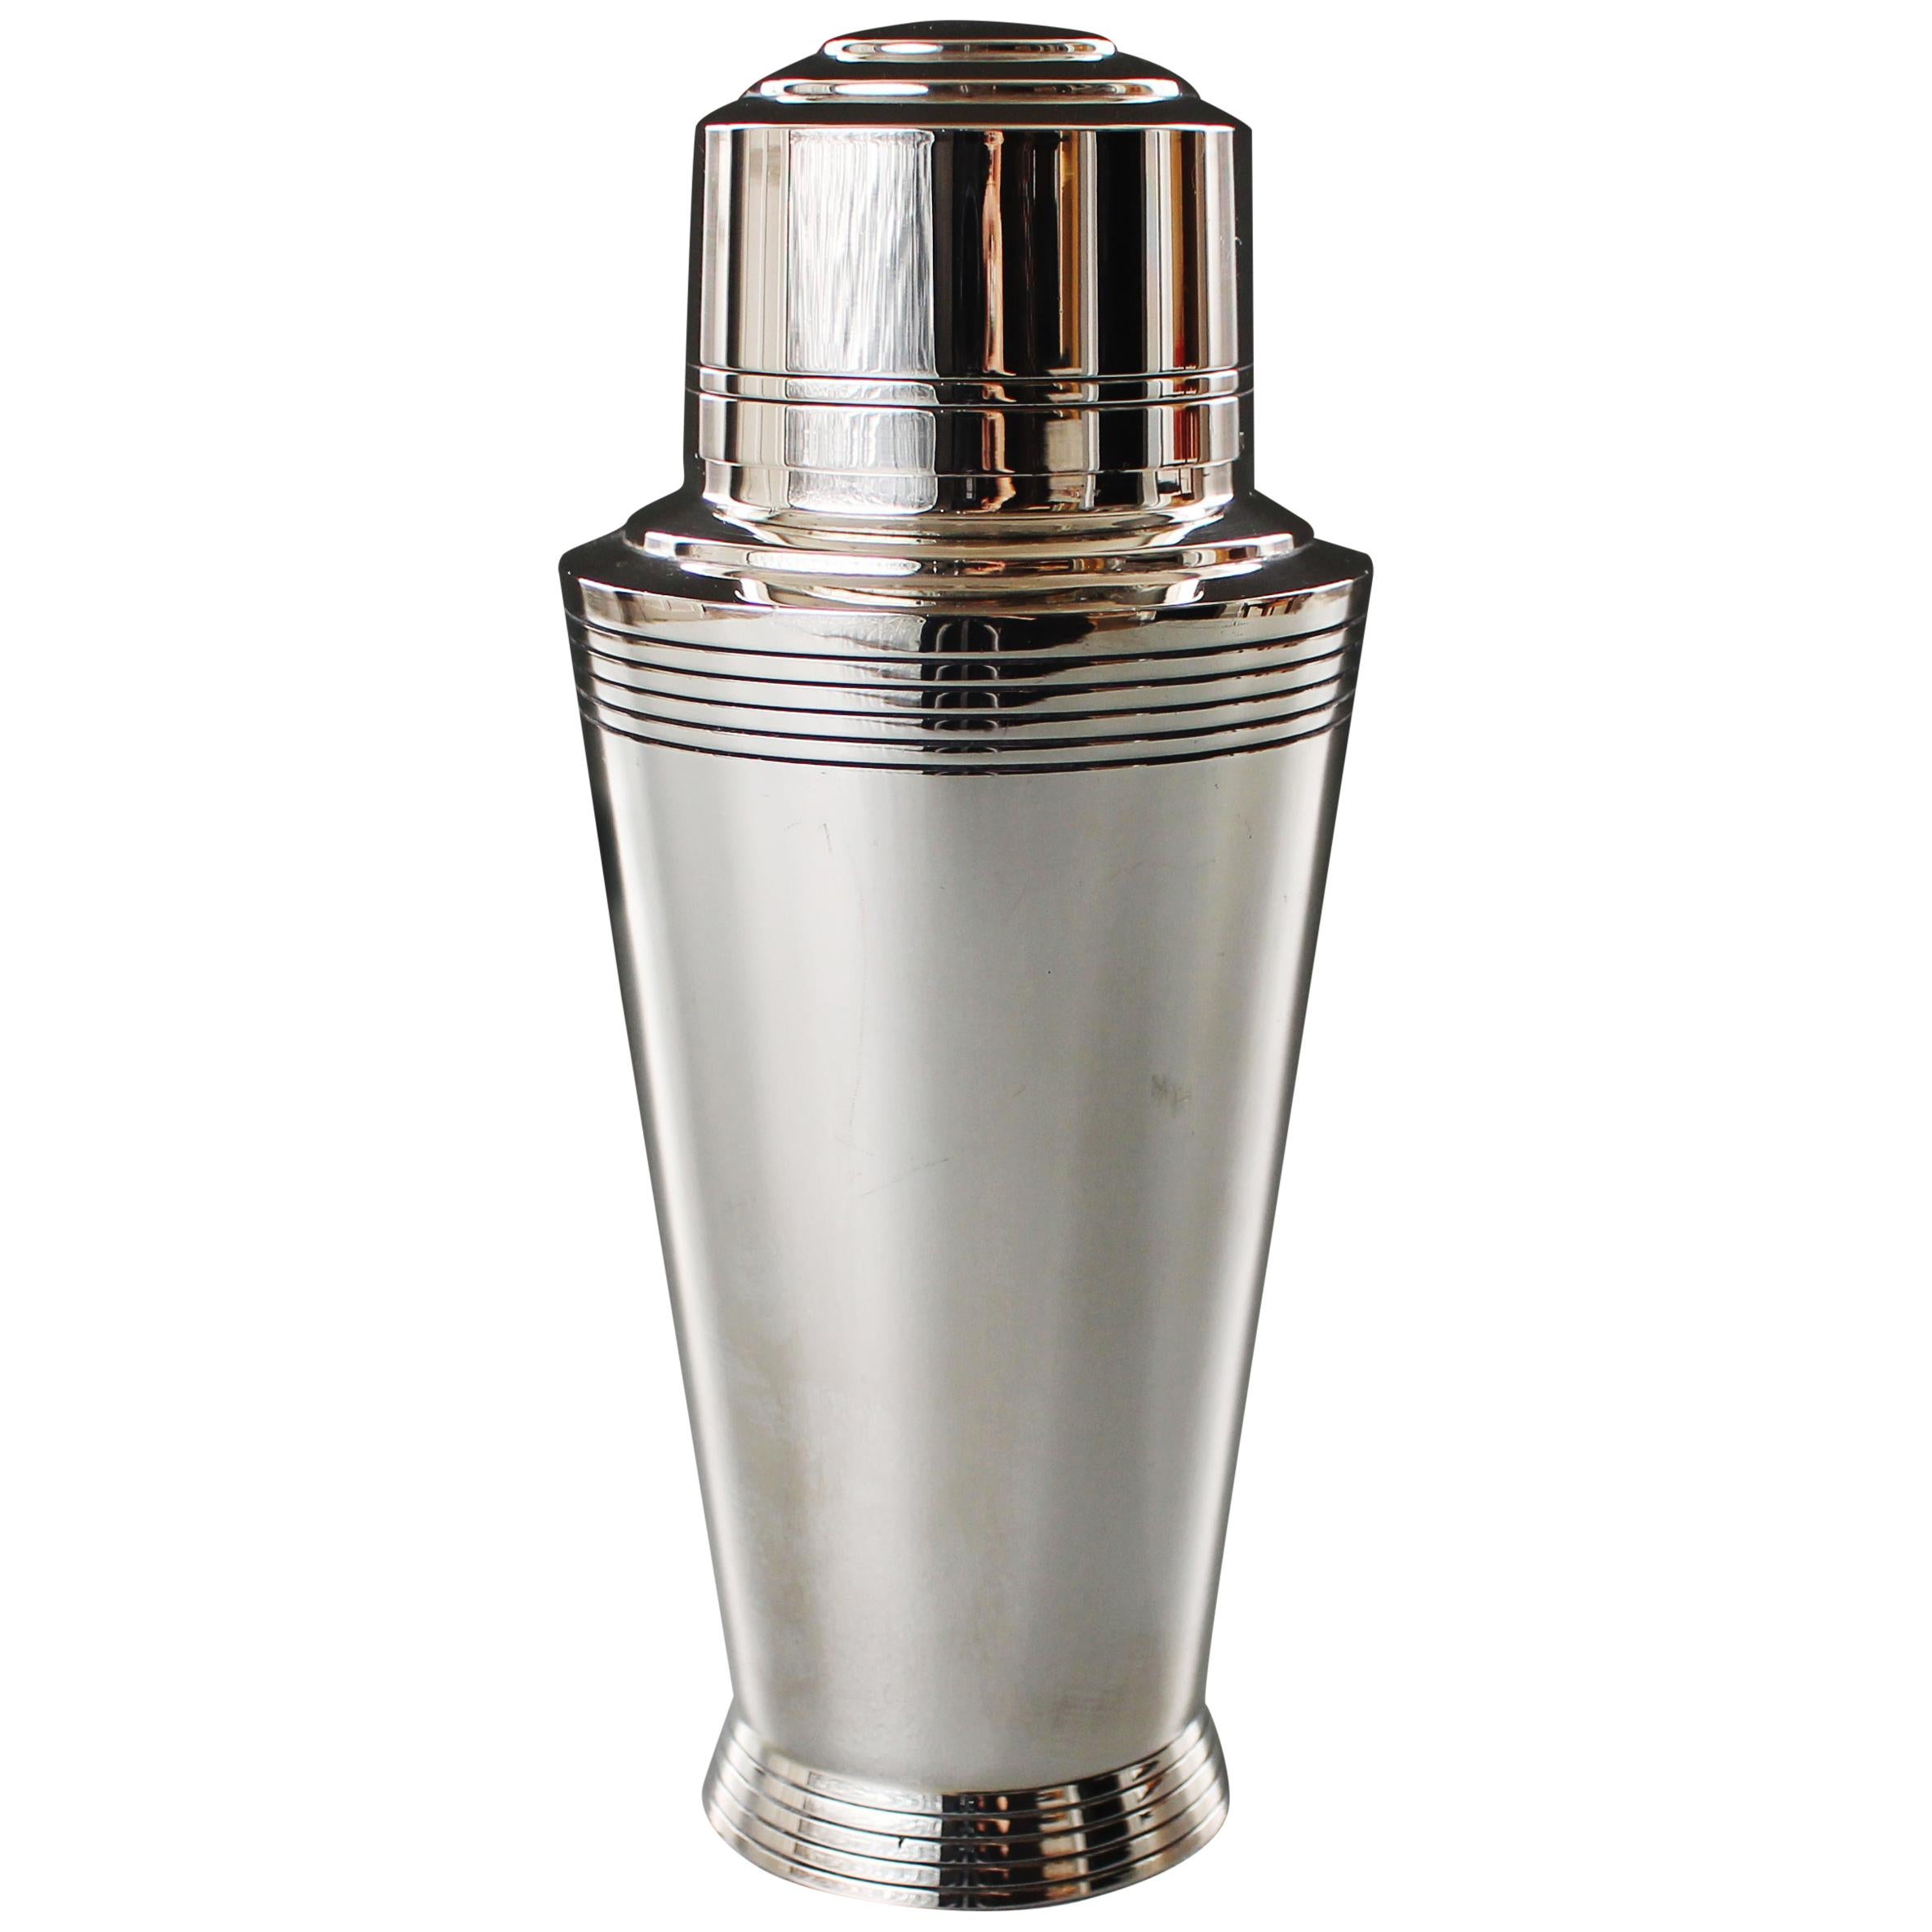 1930s Silver-Plated Cocktail Shaker Designed by Keith Murray for Mappin & Webb